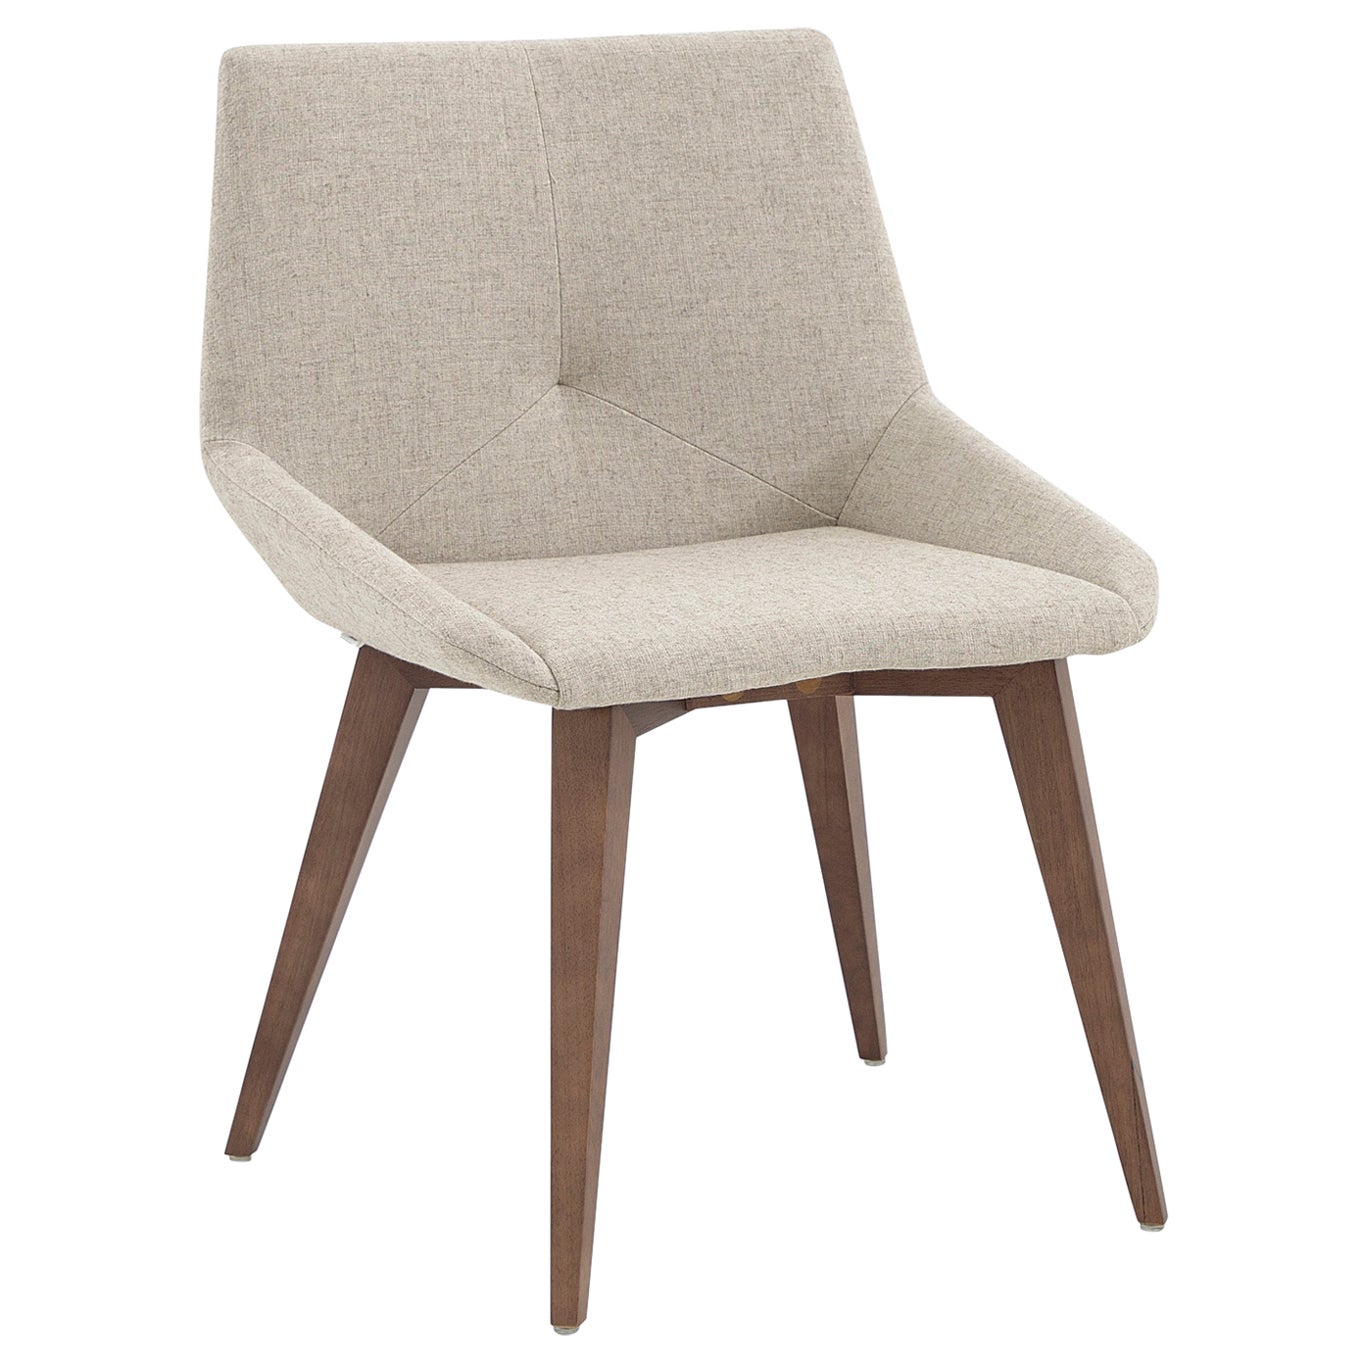 Geometric Cubi Dining Chair with Walnut Wood Finish Base and Ivory Fabric